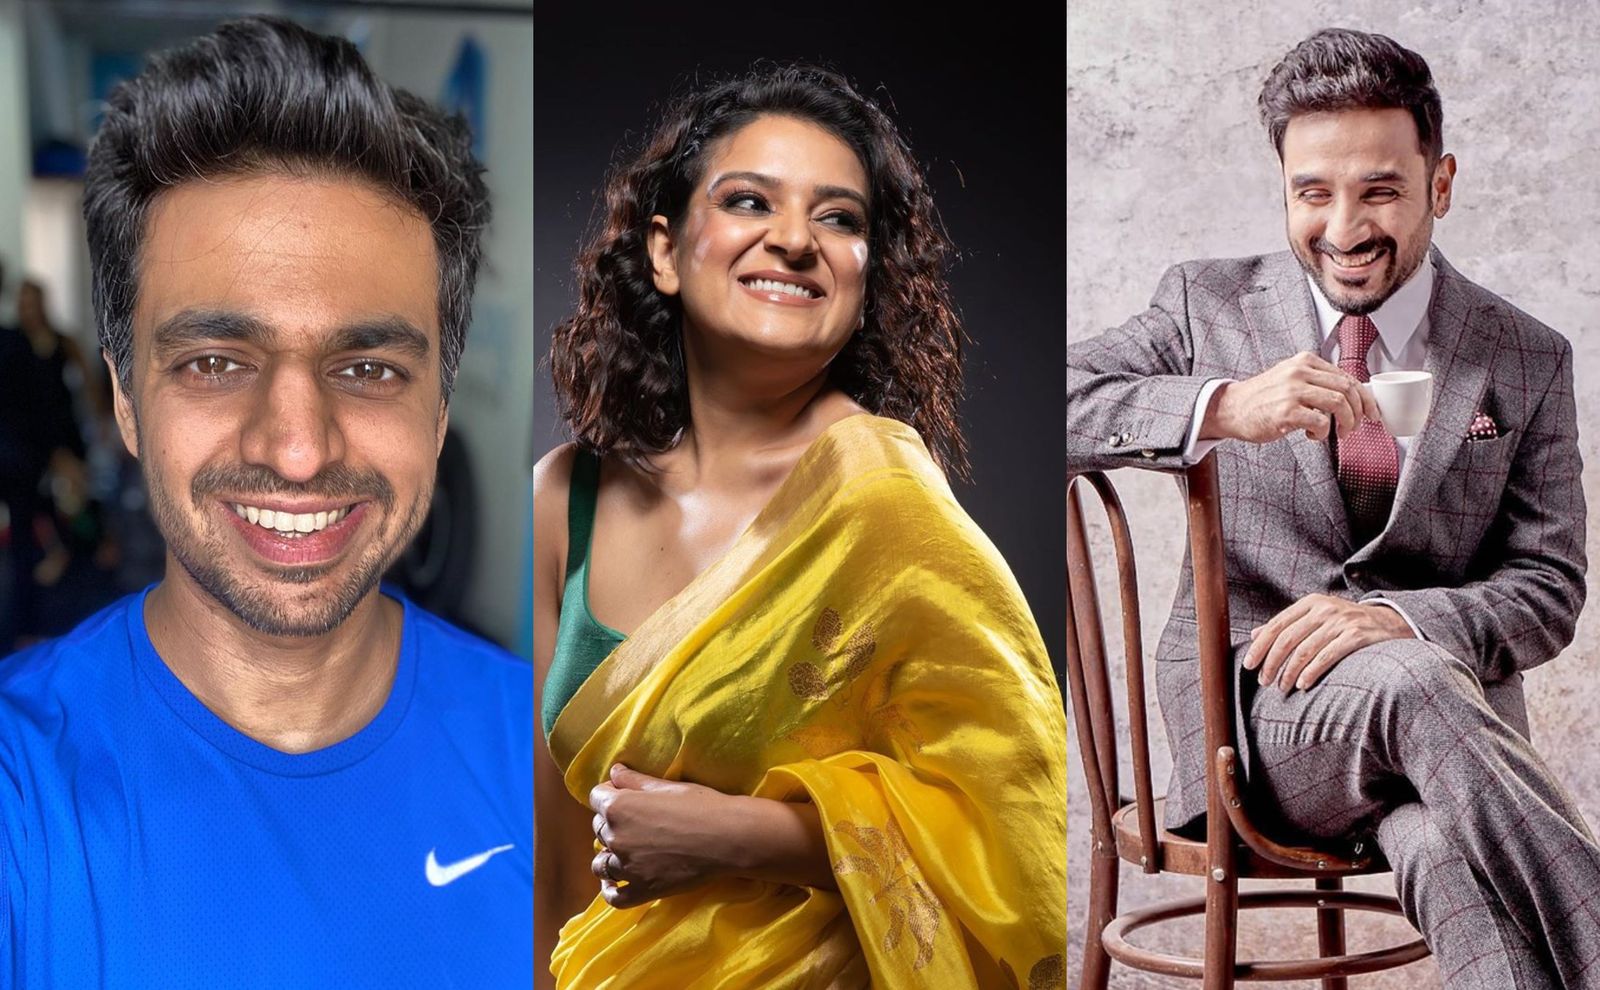 Personal Information Of Comics Including Vir Das, Rohan Joshi And Others Leaked On Twitter, Receive Abuses And Threats 